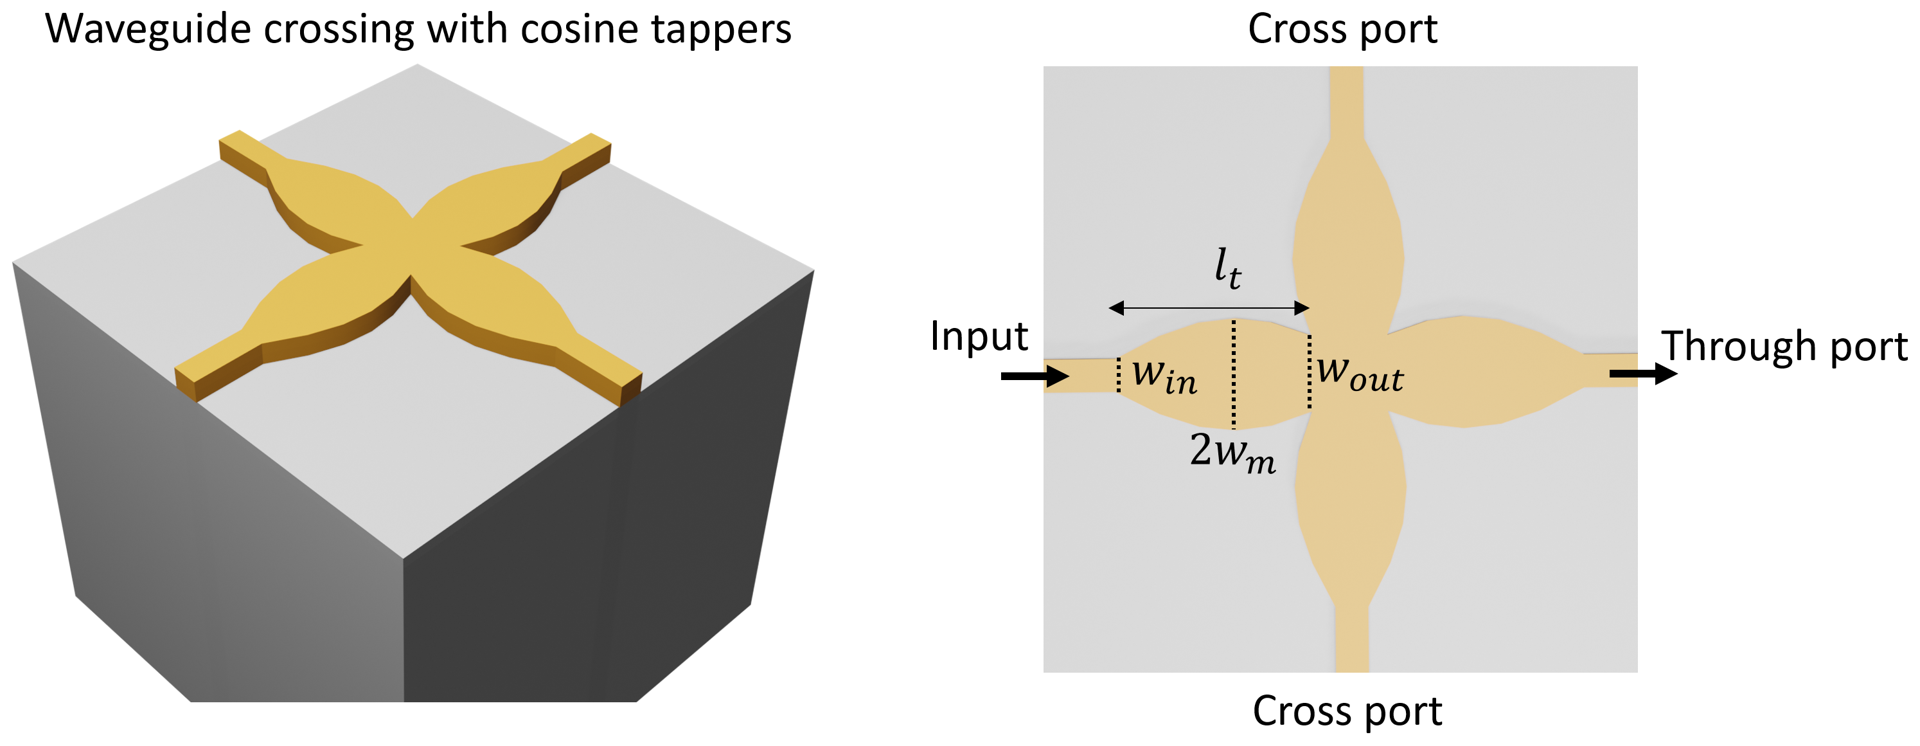 Schematic of the waveguide crossing